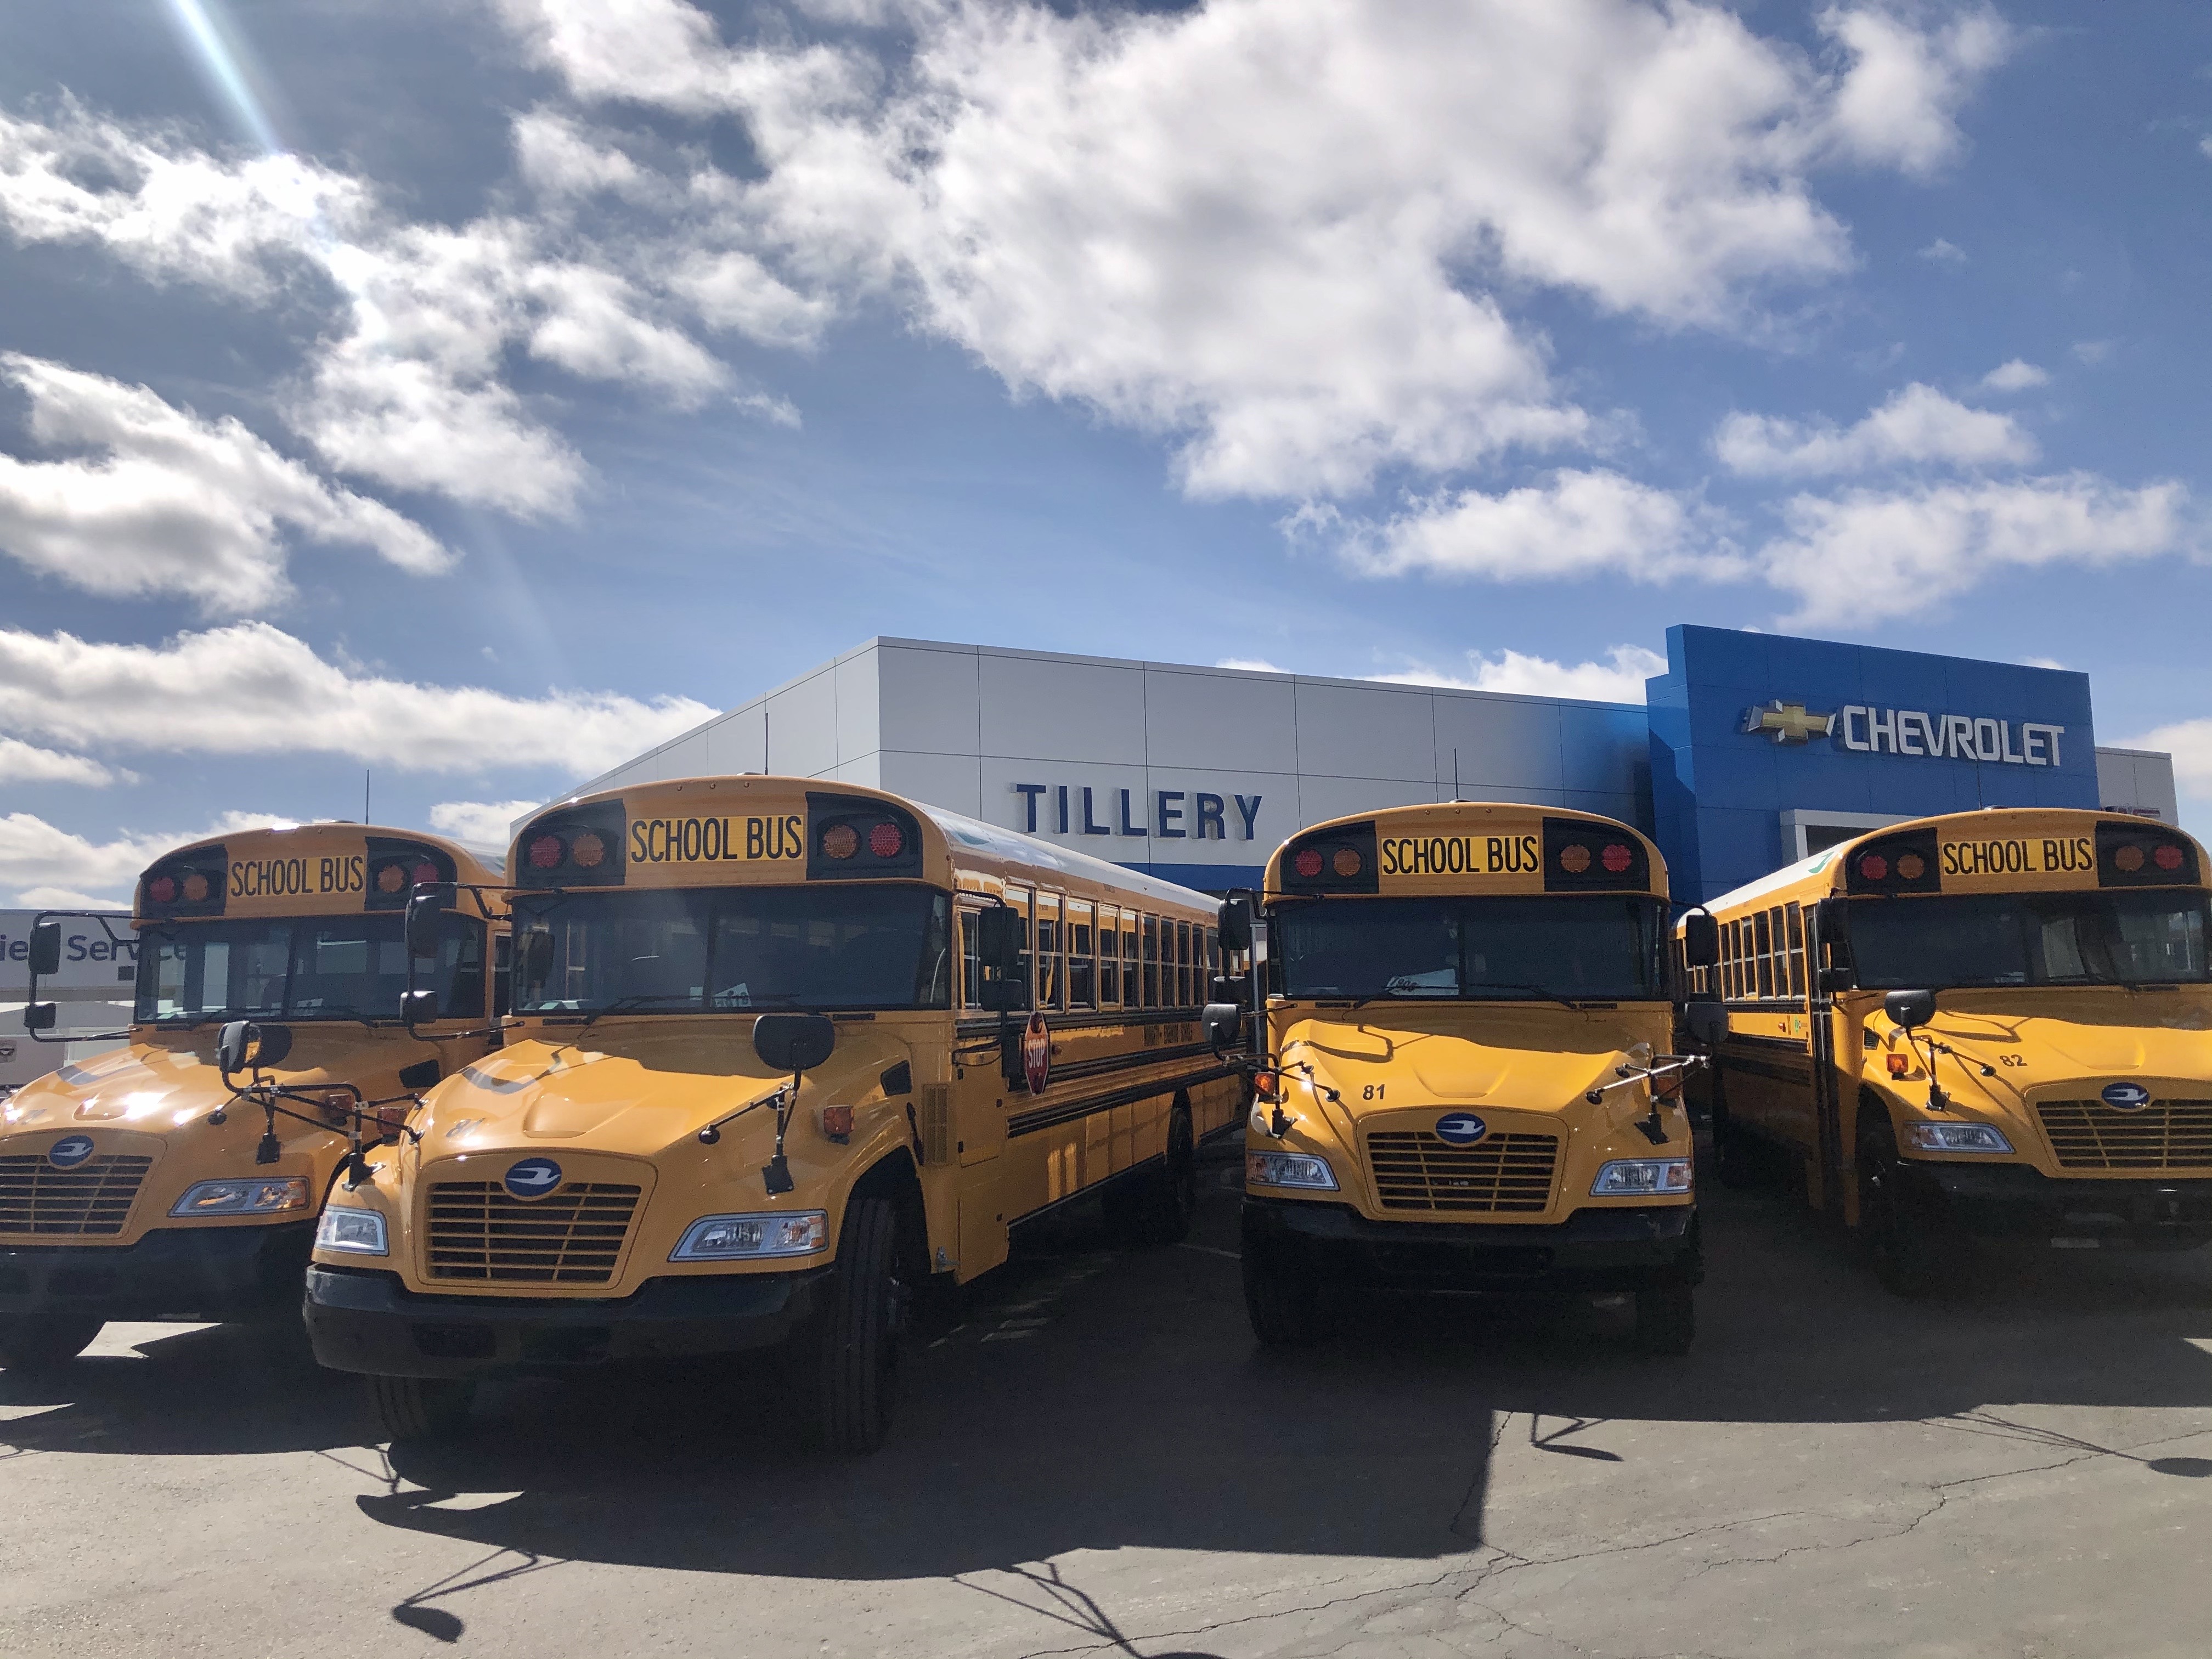 New Mexico schools upgrade to clean propane autogas Blue Bird School Buses to reduce costs, pollution from dirty diesel and noise reports BPN the propane industry's leading source for news since 1939